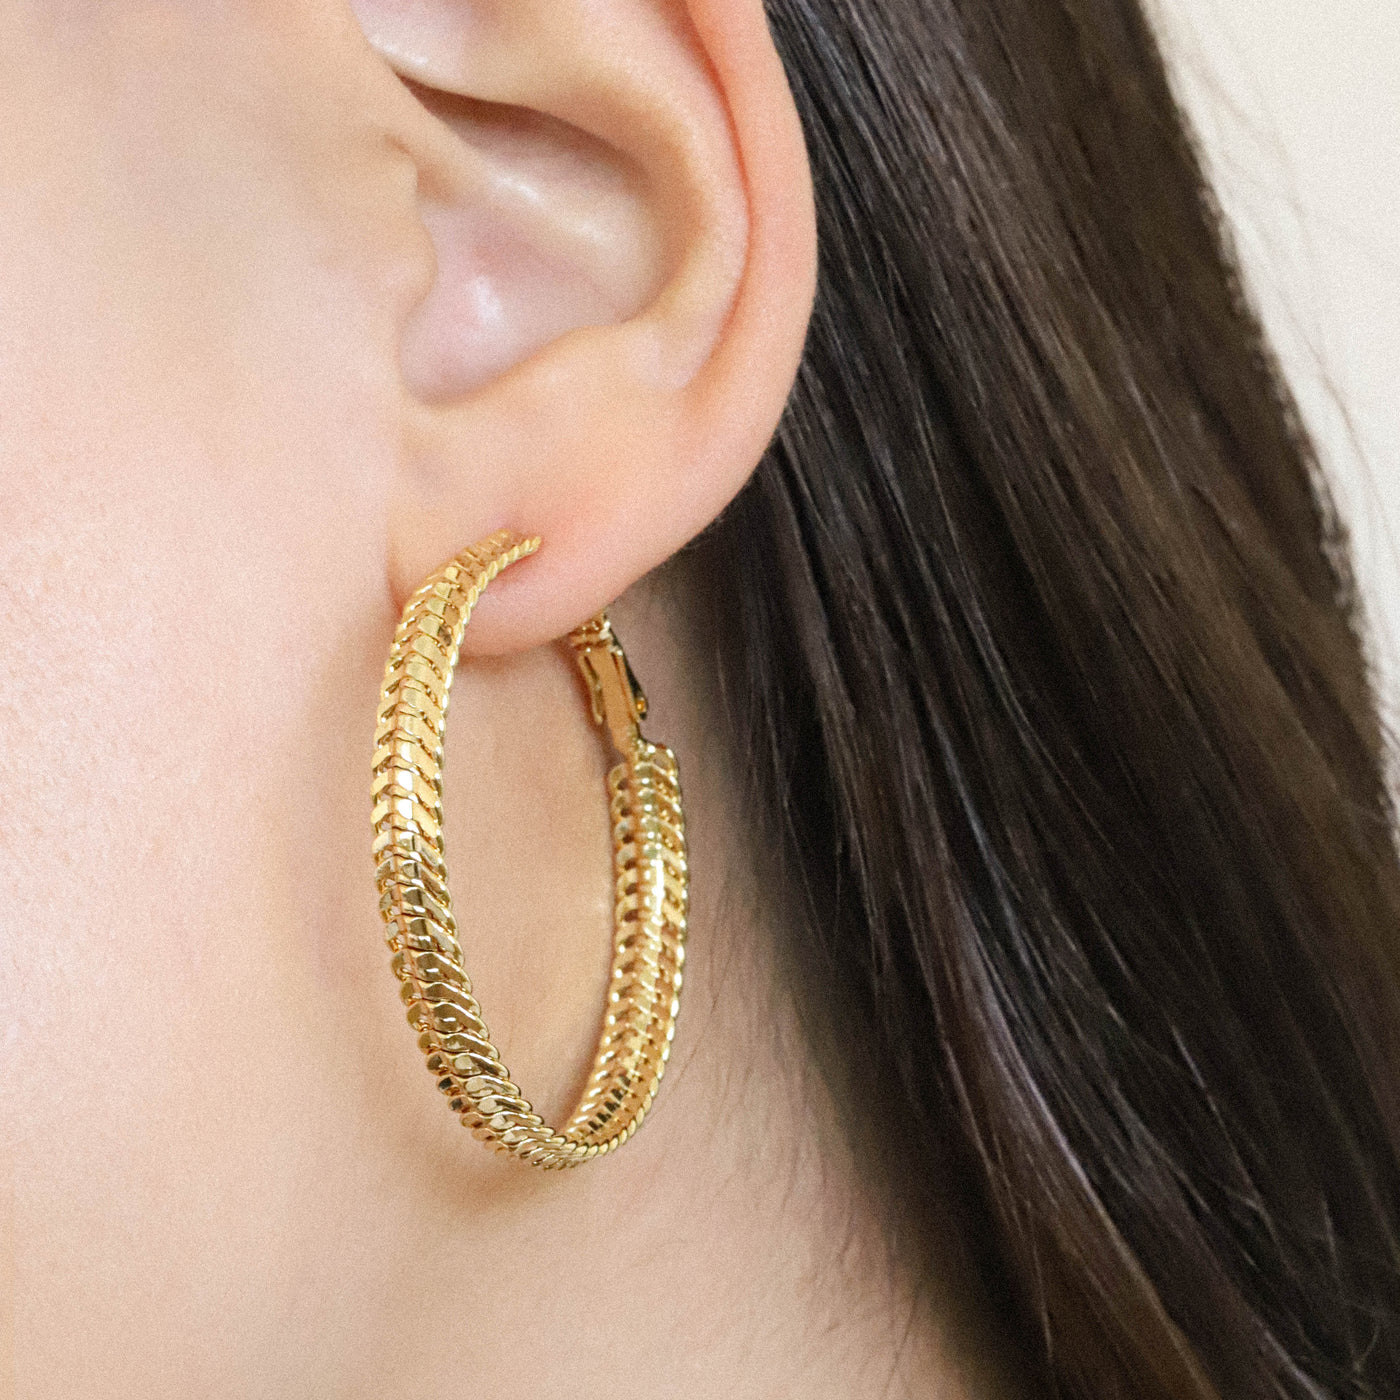 Gold hoops